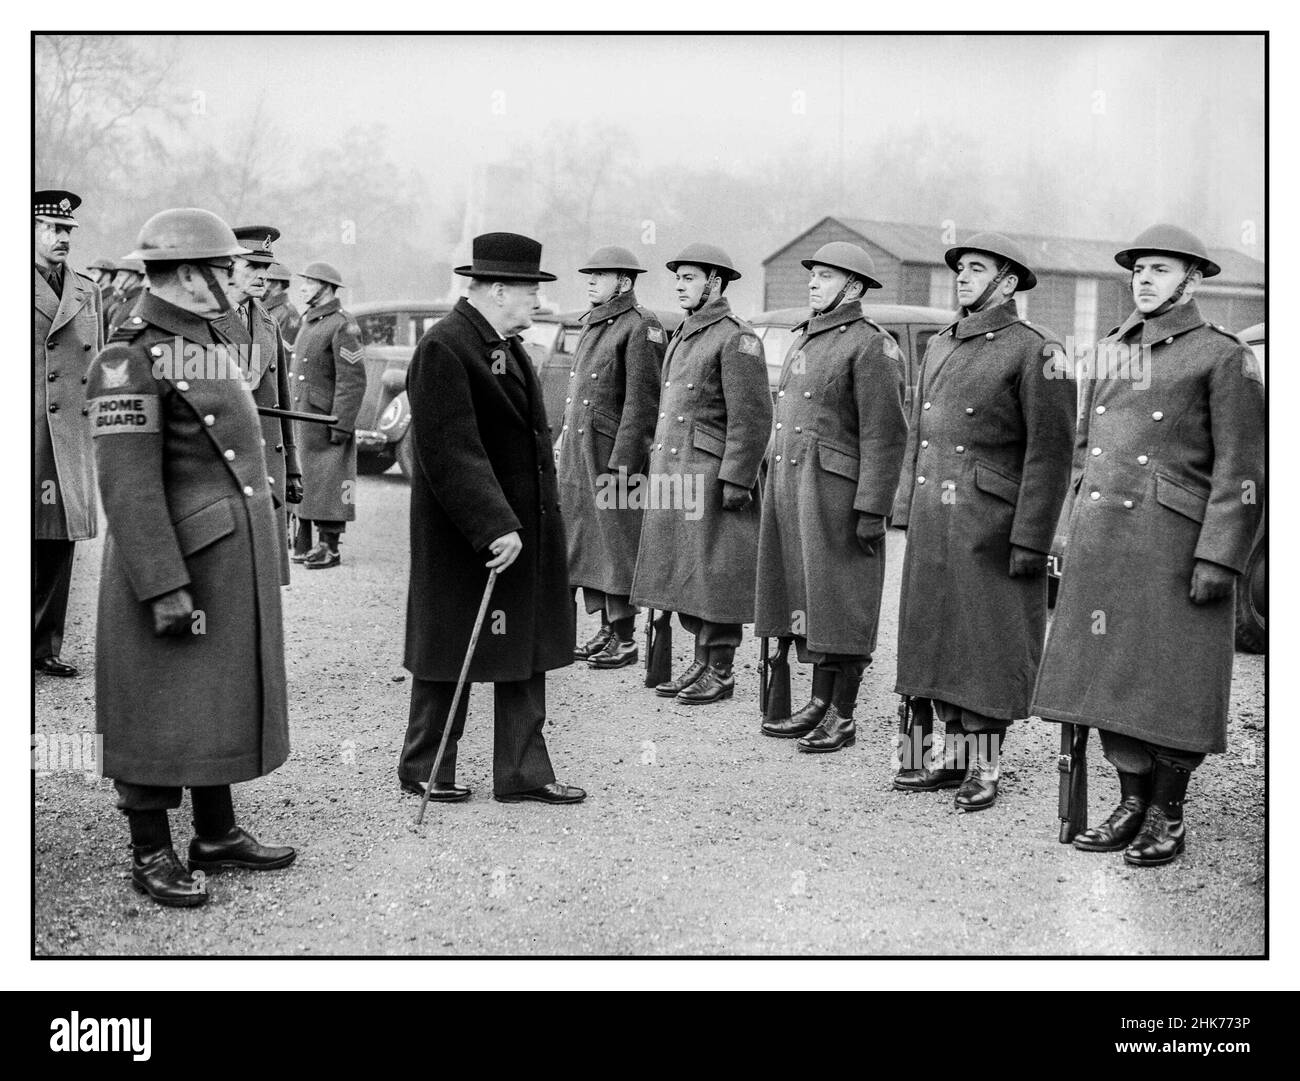 WW2 Winston Churchill inspects the 1st American Squadron of the Home Guard on Horse Guards Parade, London, 9 January 1941 World War II The Prime Minister Winston Churchill inspects the 1st American Squadron of the Home Guard on Horse Guards Parade, London, on 9 January 1941. WW2/Propaganda Stock Photo